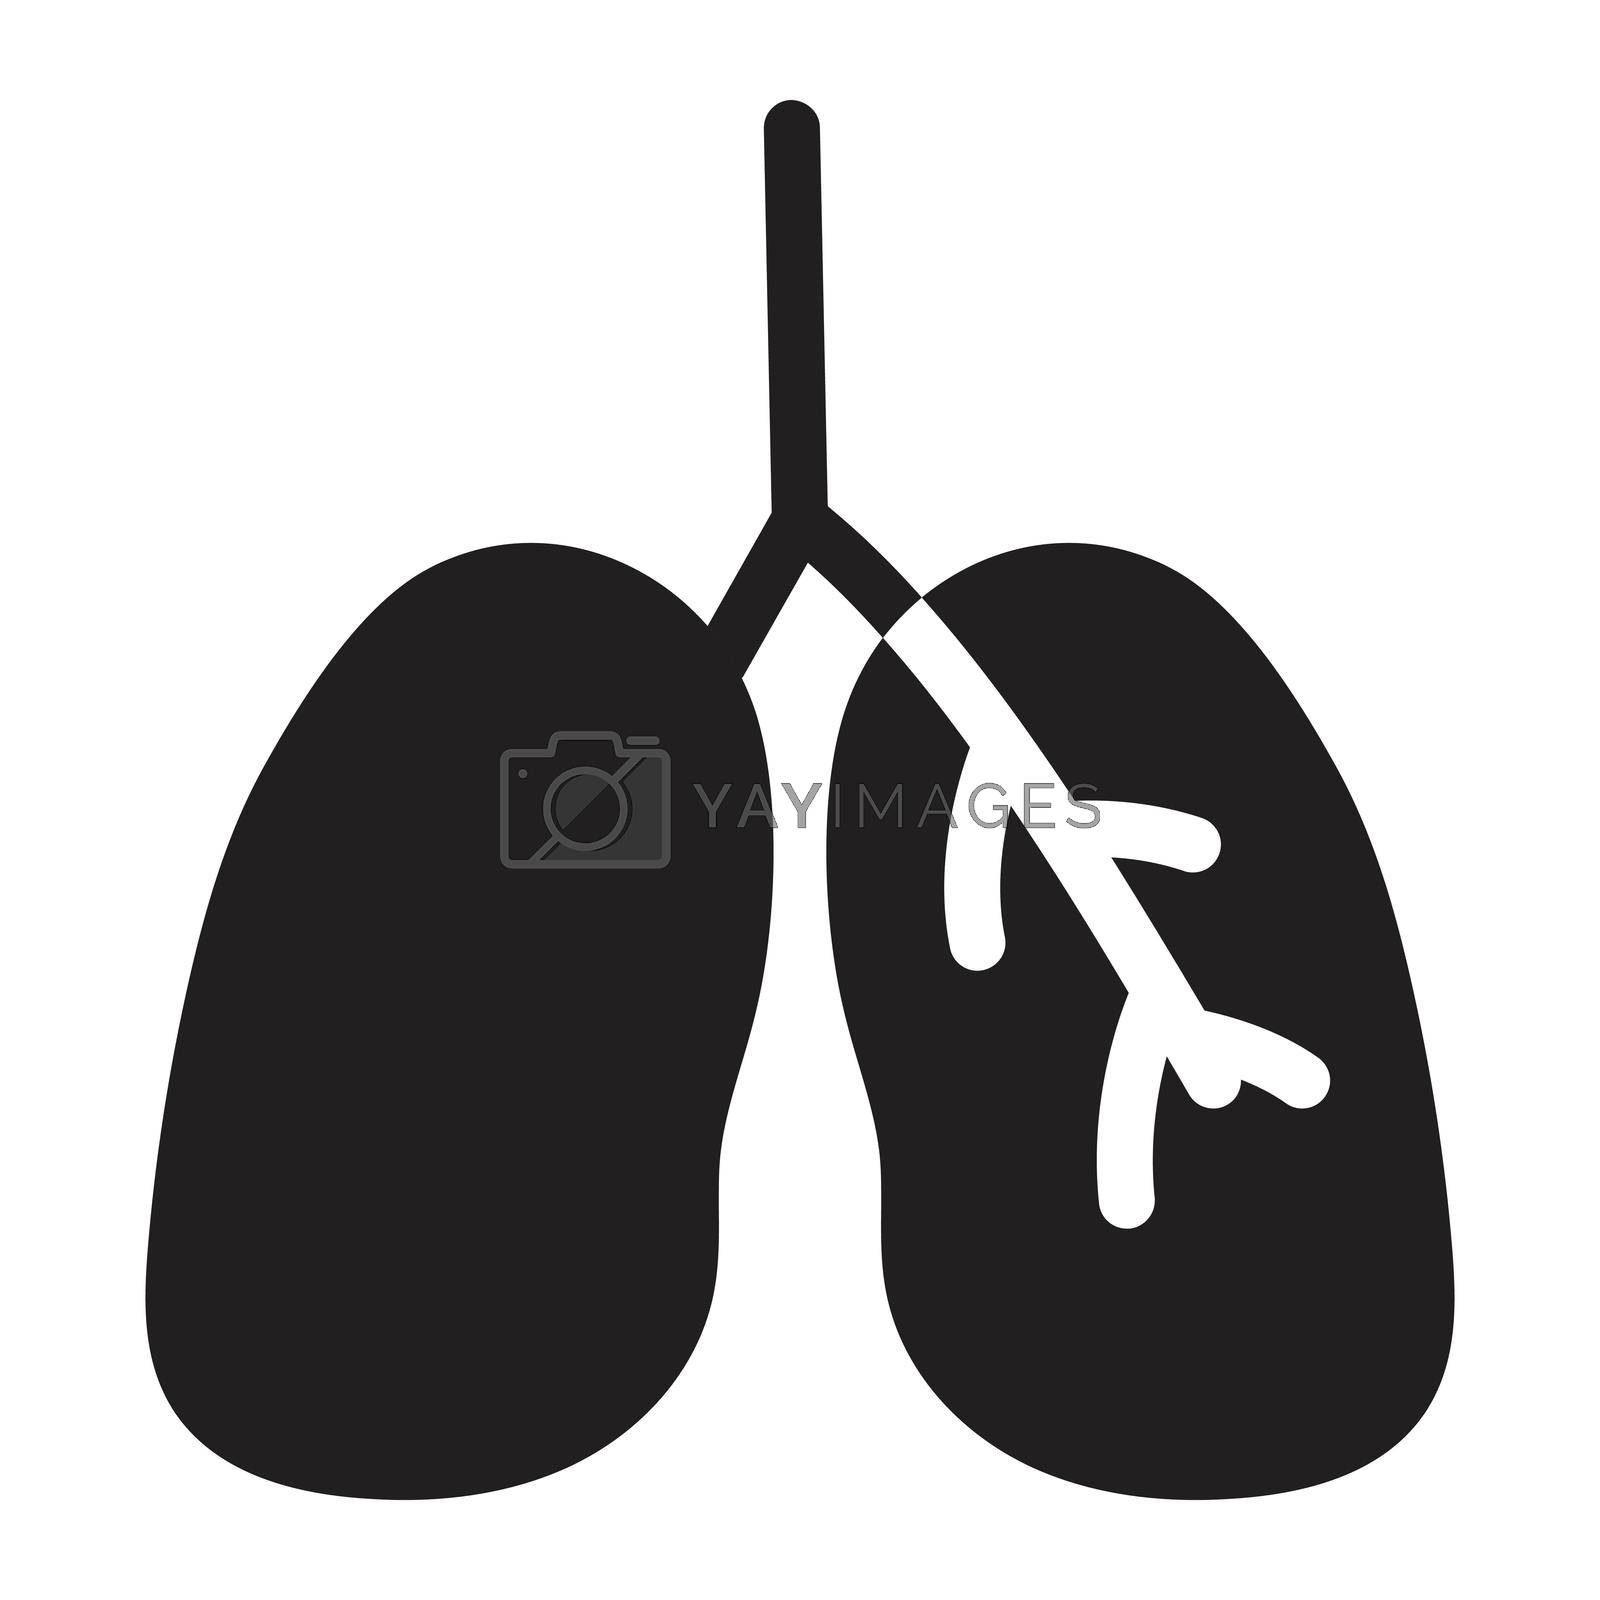 Royalty free image of lungs  by FlaticonsDesign